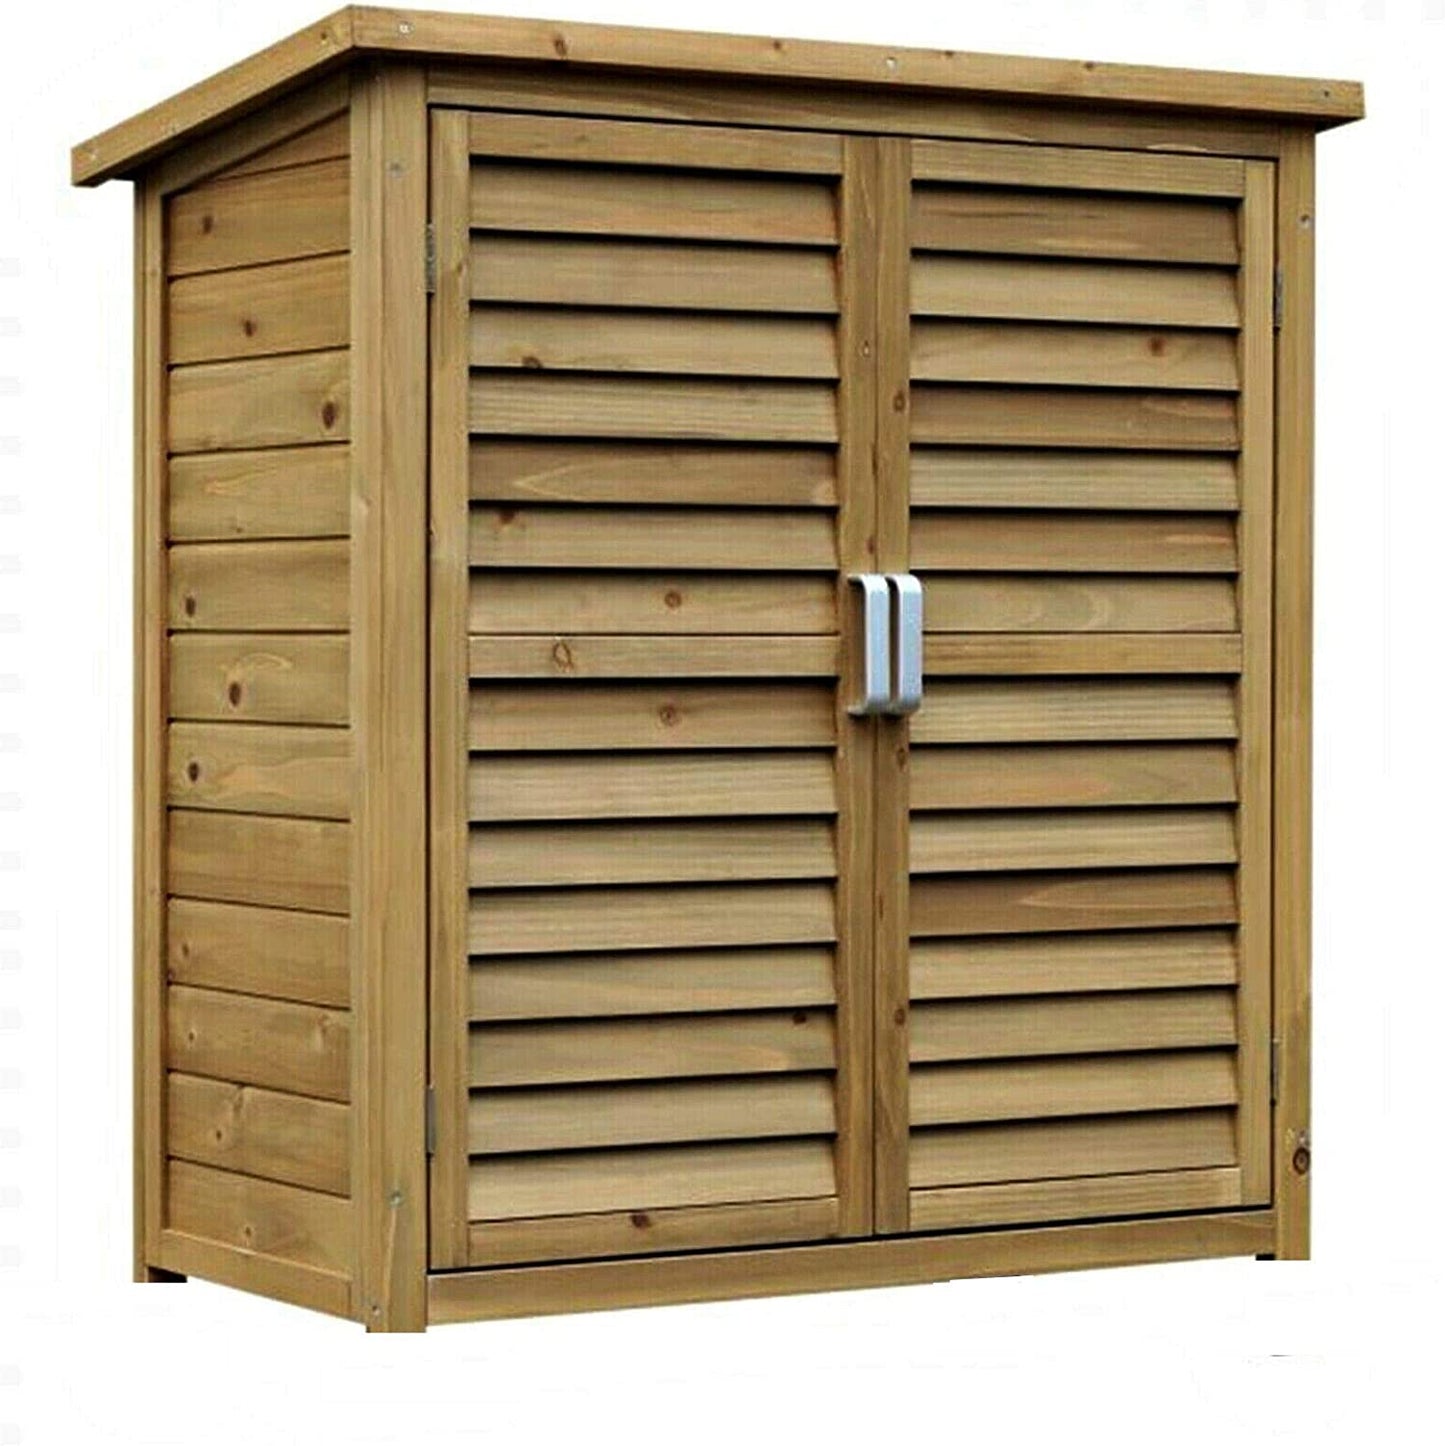 HYGRAD All Weather Wooden Outdoor Garden Lawn Cabinet Tool Shed Shelf Cupboard Storage In 2 Sizes (Large: 87 x 46.5 x 96cm) Generic